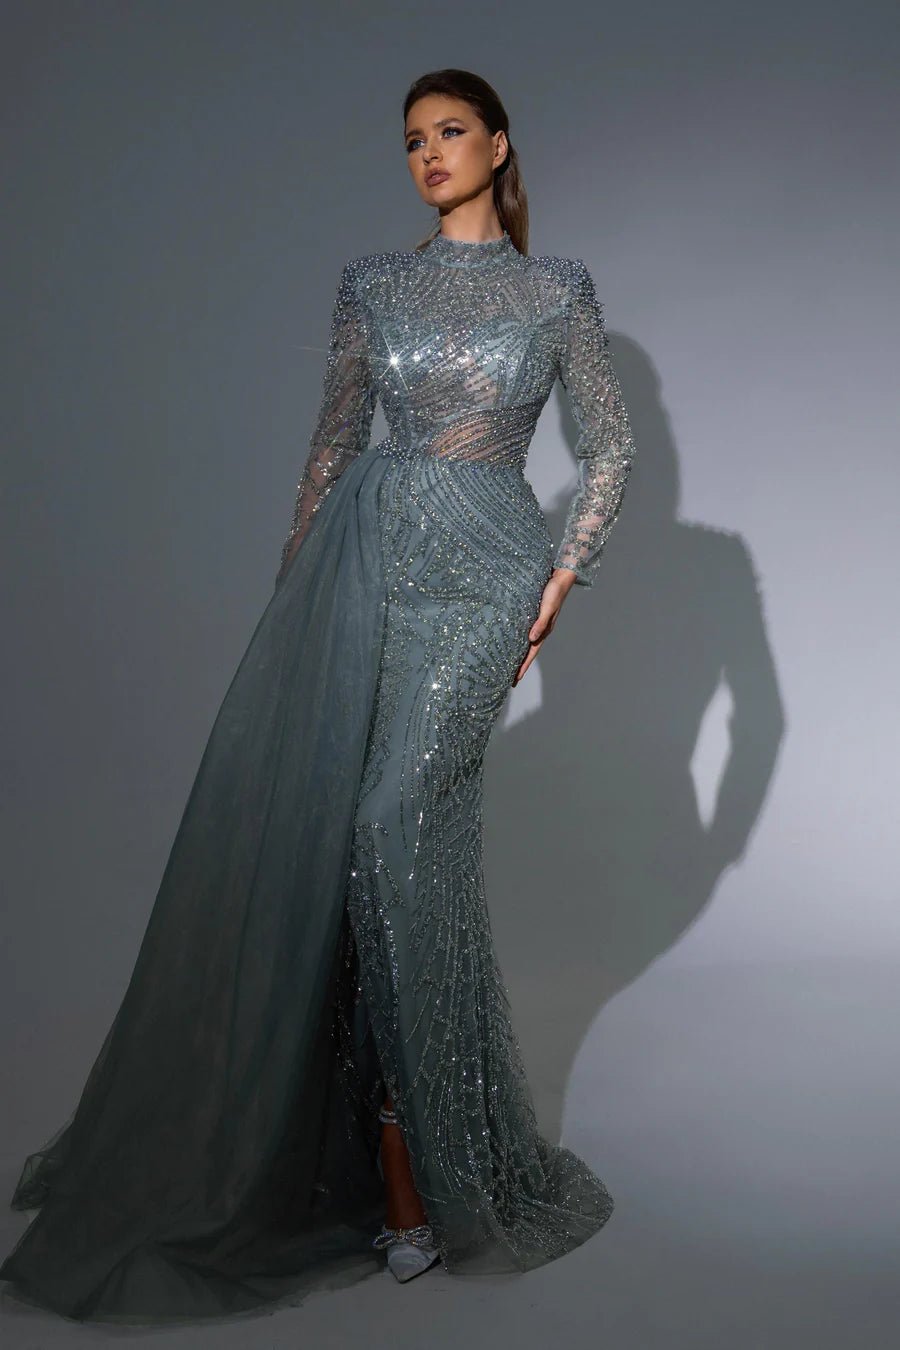 Gothic Blue Sequin Evening Gown with Long Sleeves and Cape Overlay Dress - Designer Sequin Gown Plus Size - WonderlandByLilian